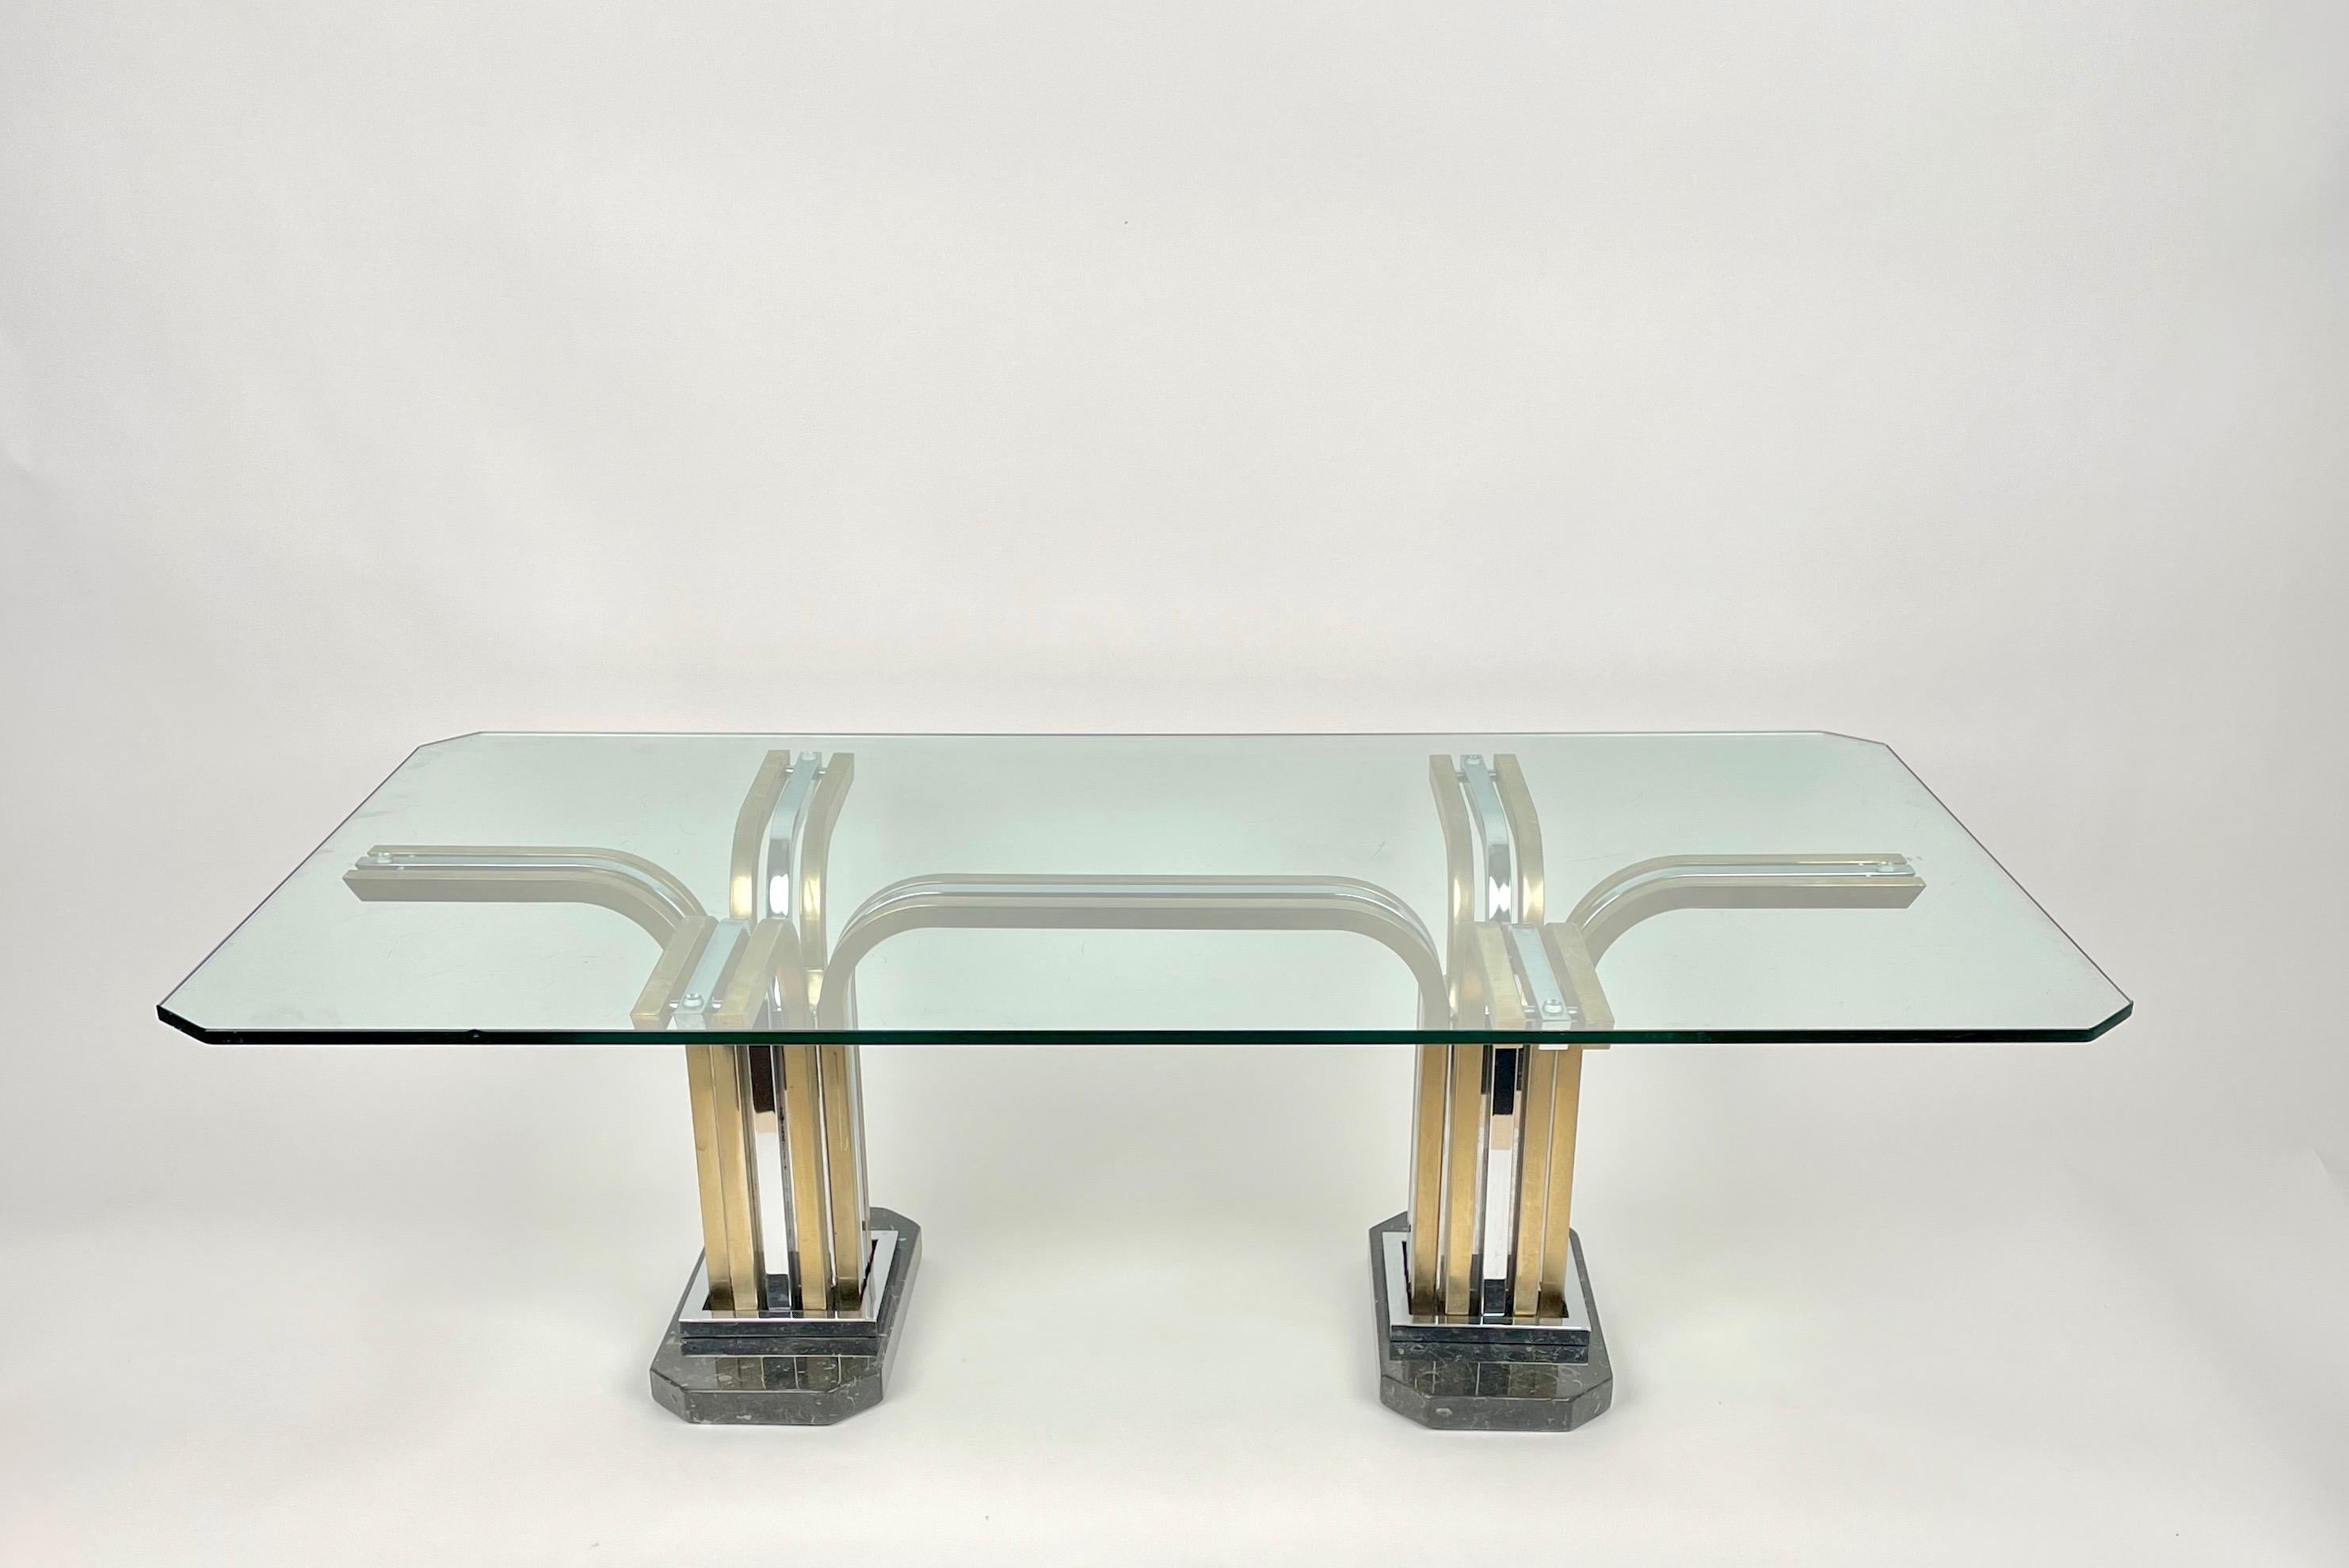 Rectangular coffee table featuring a marble base with chrome and brass legs and a glass surface in the style of the Italian designer Romeo Rega. Made in Italy in the 1970s.